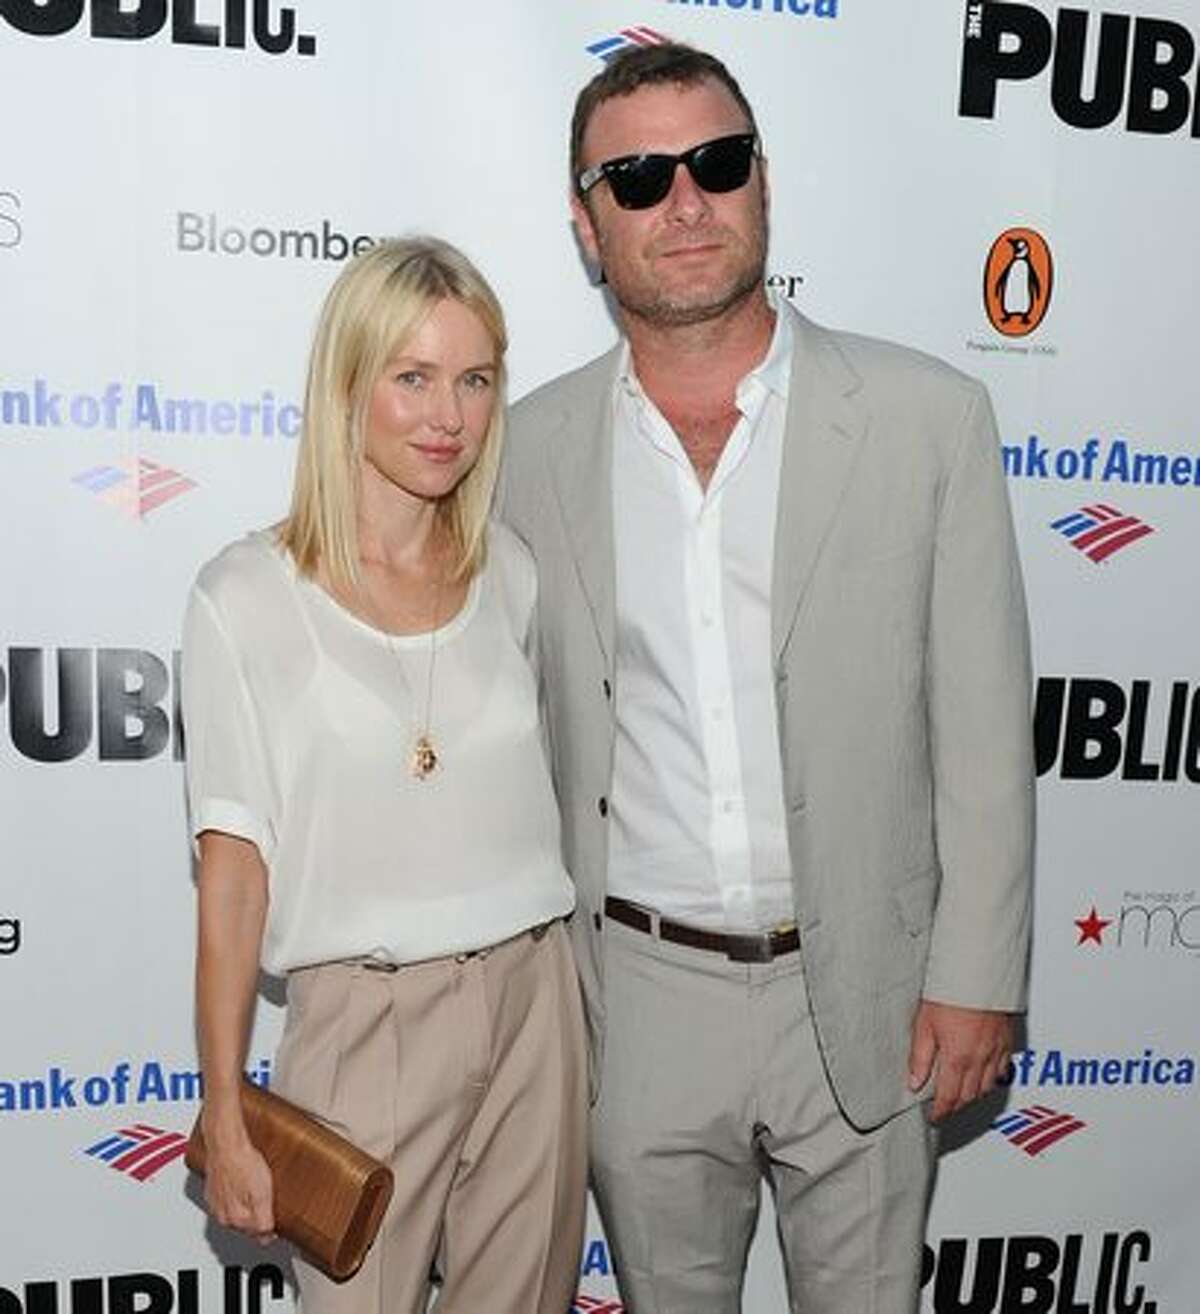 Actress Naomi Watts and actor Liev Schreiber attend the 2010 Public Theater Gala at the Delacorte Theater.